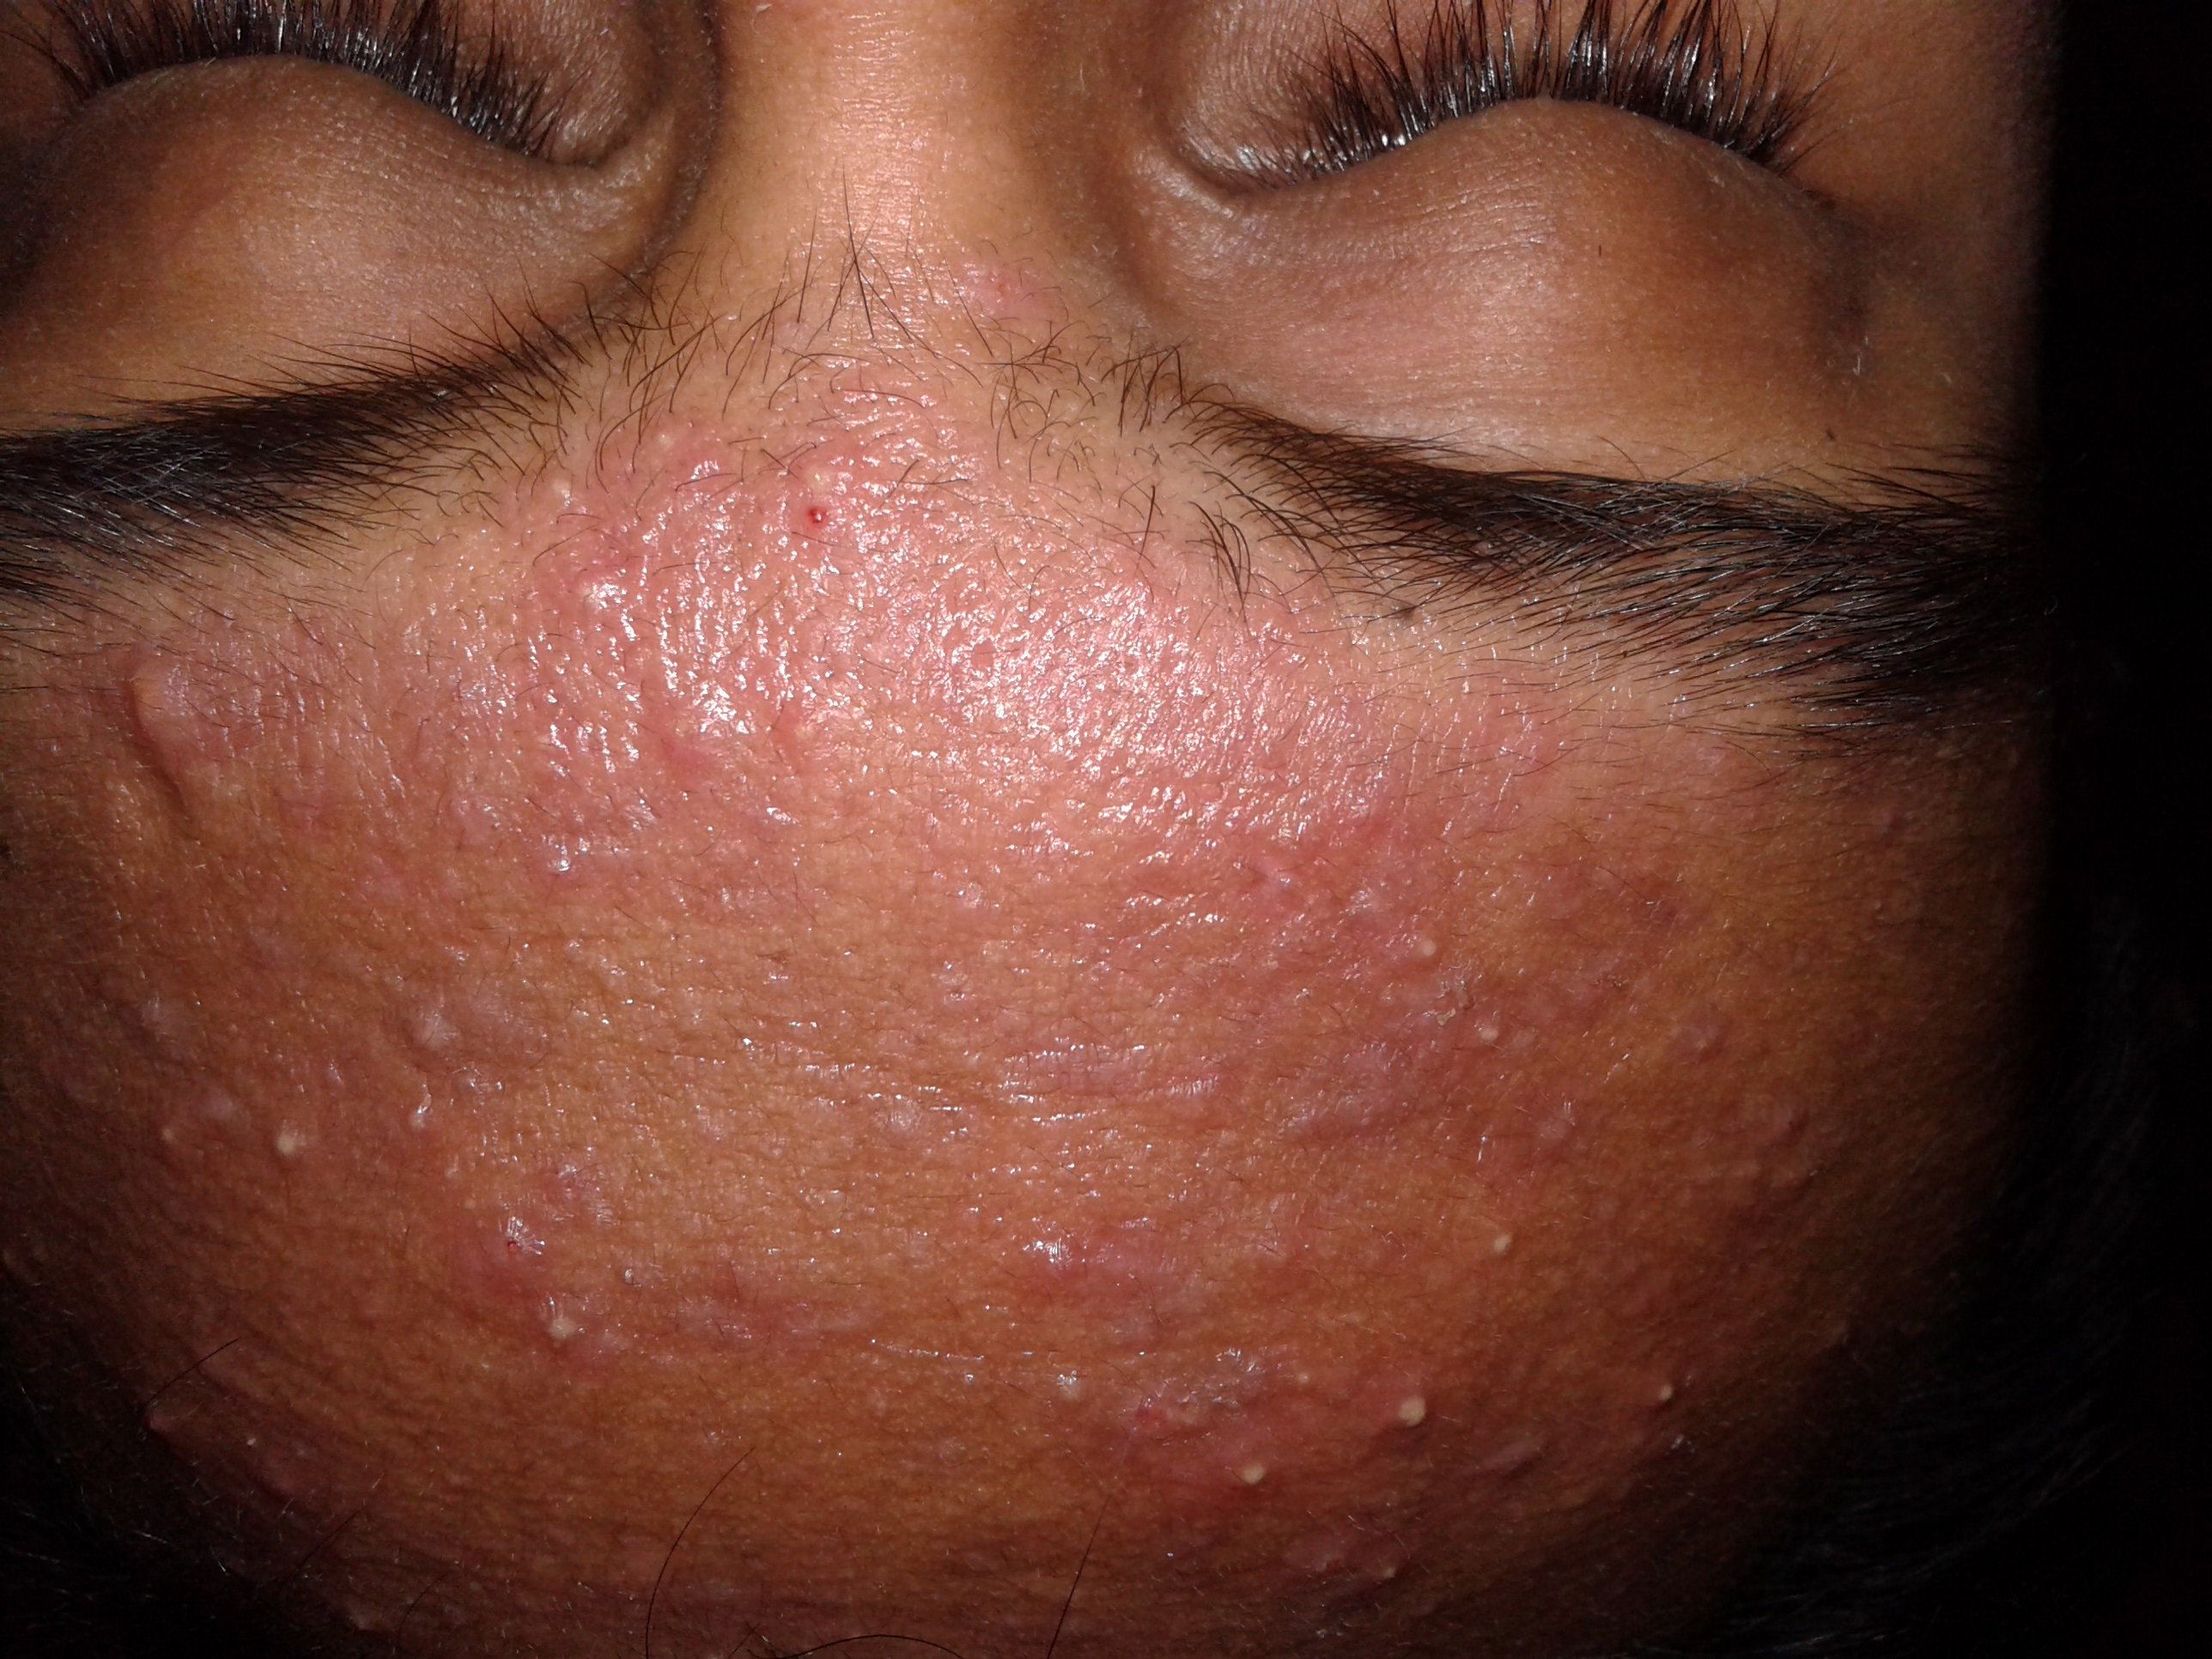 Is facial acne related to stds